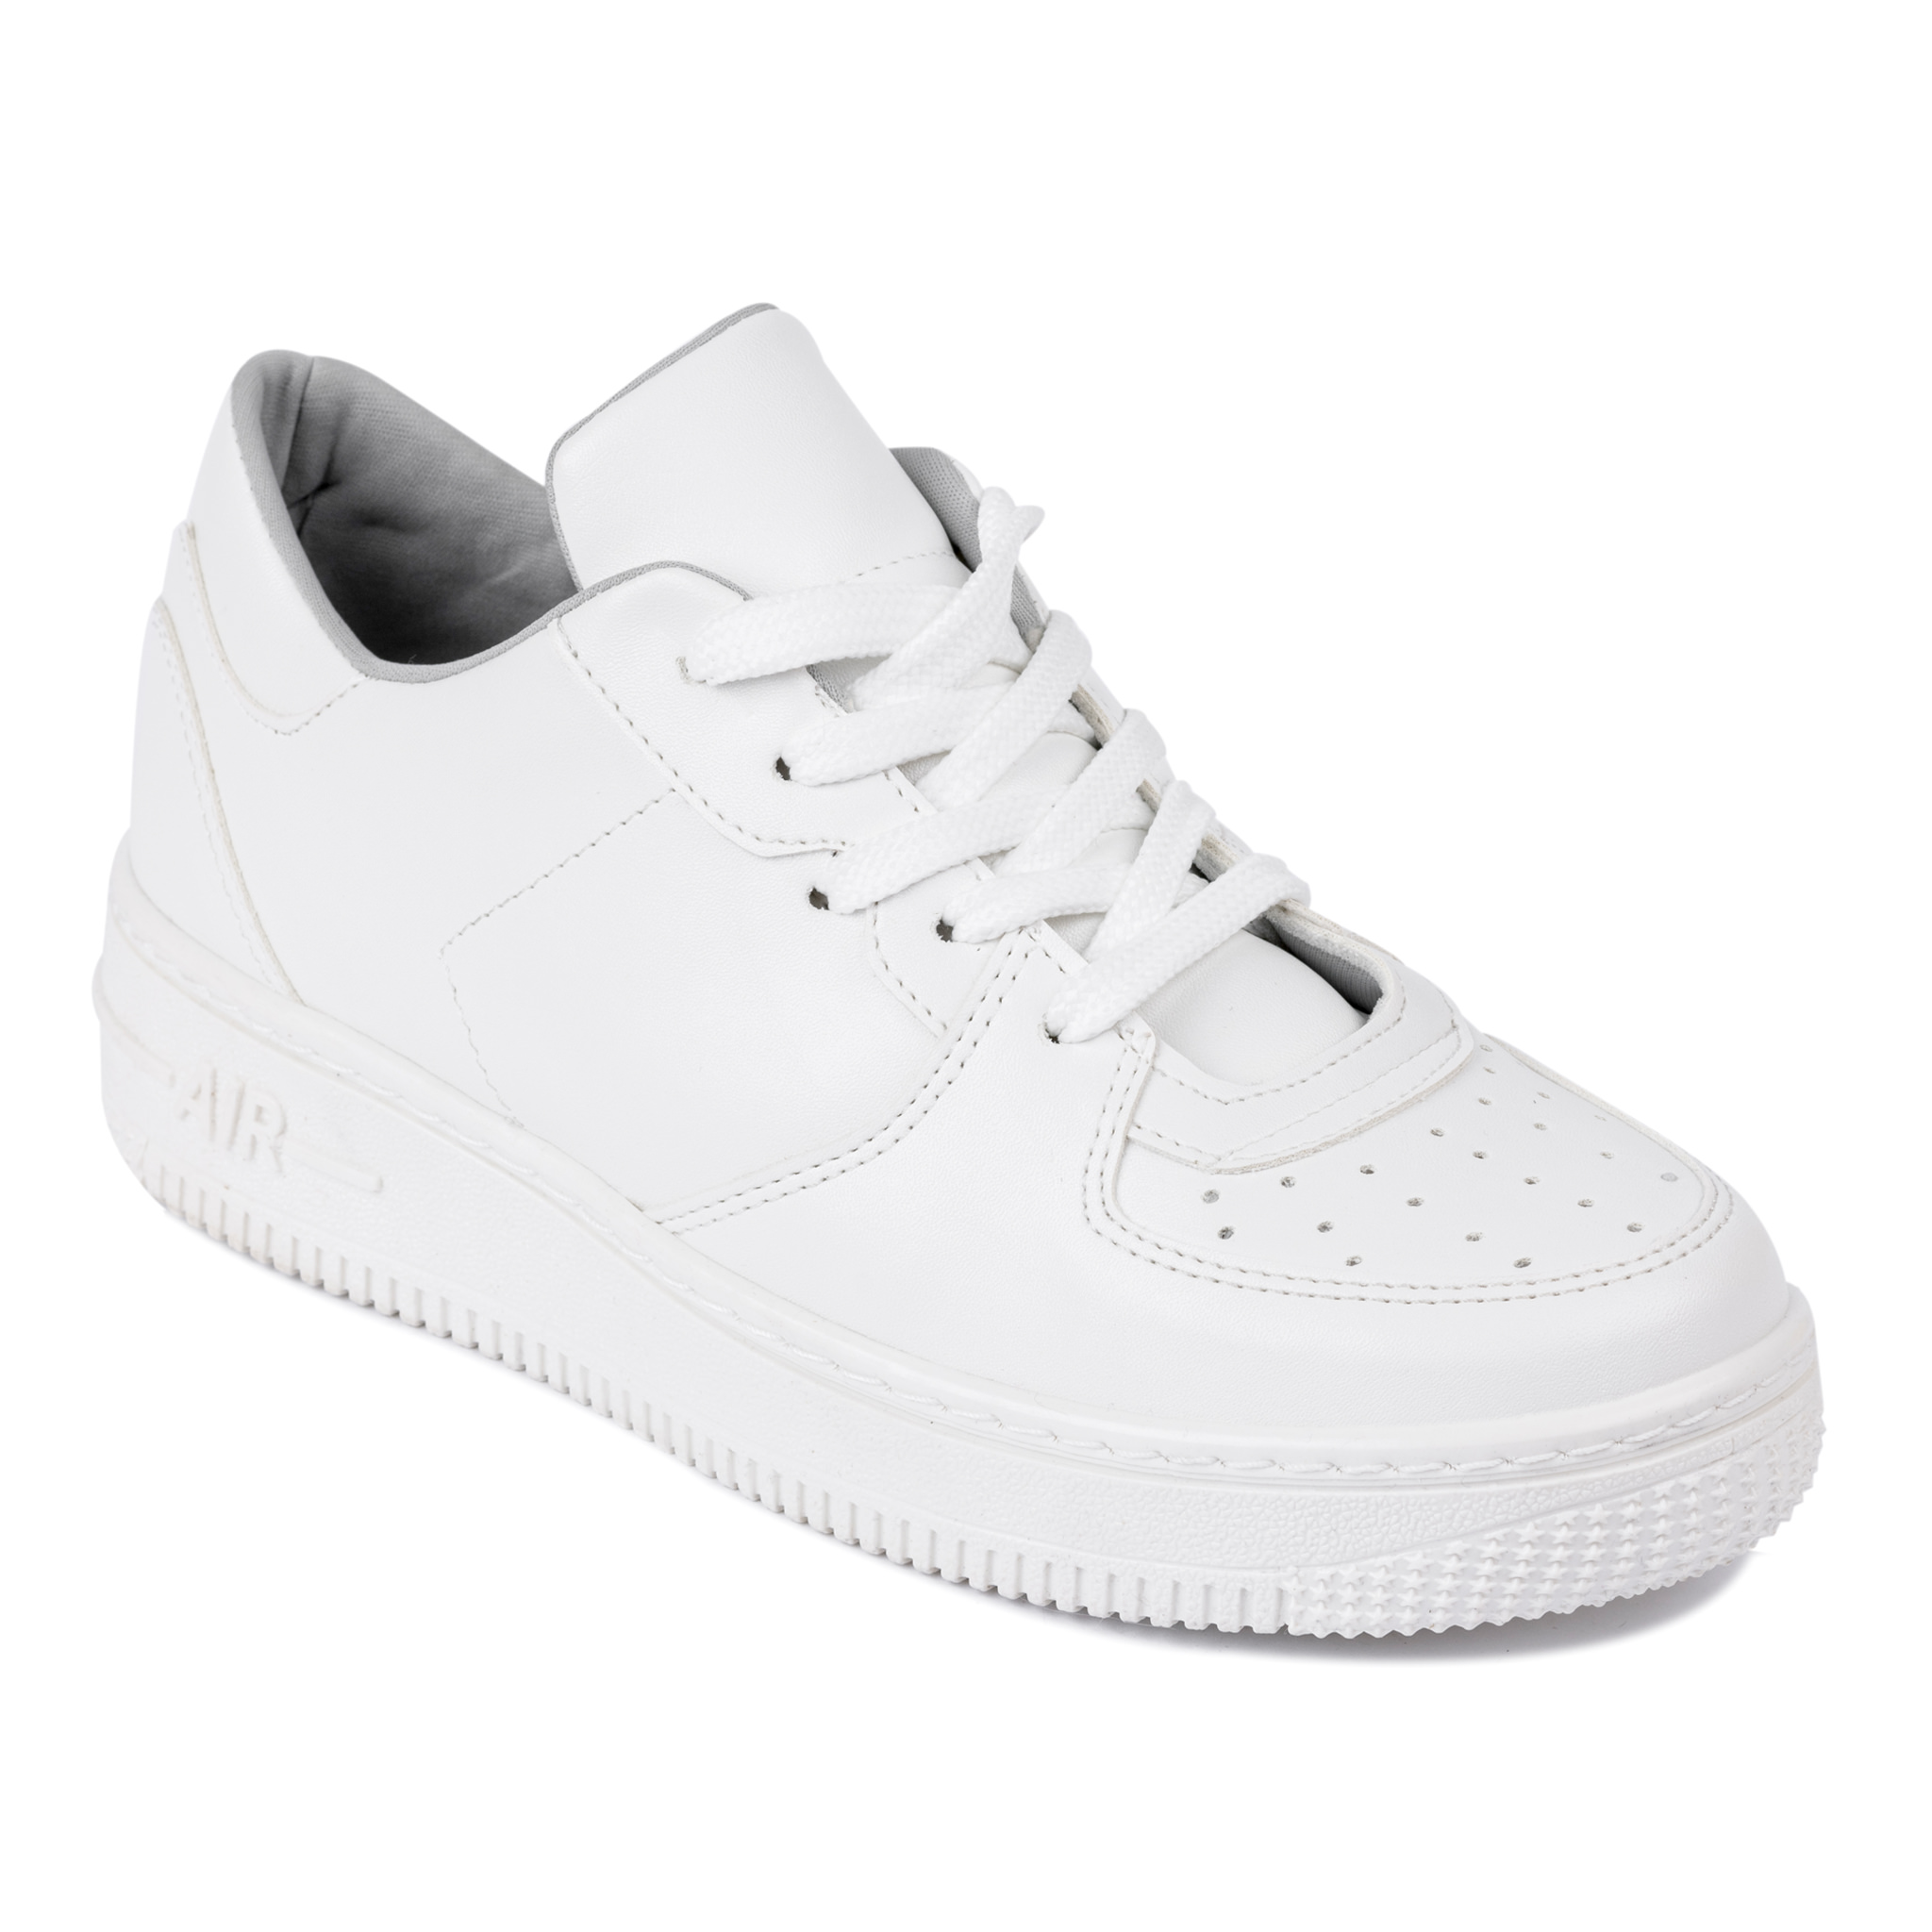 SHALLOW SNEAKERS - WHITE